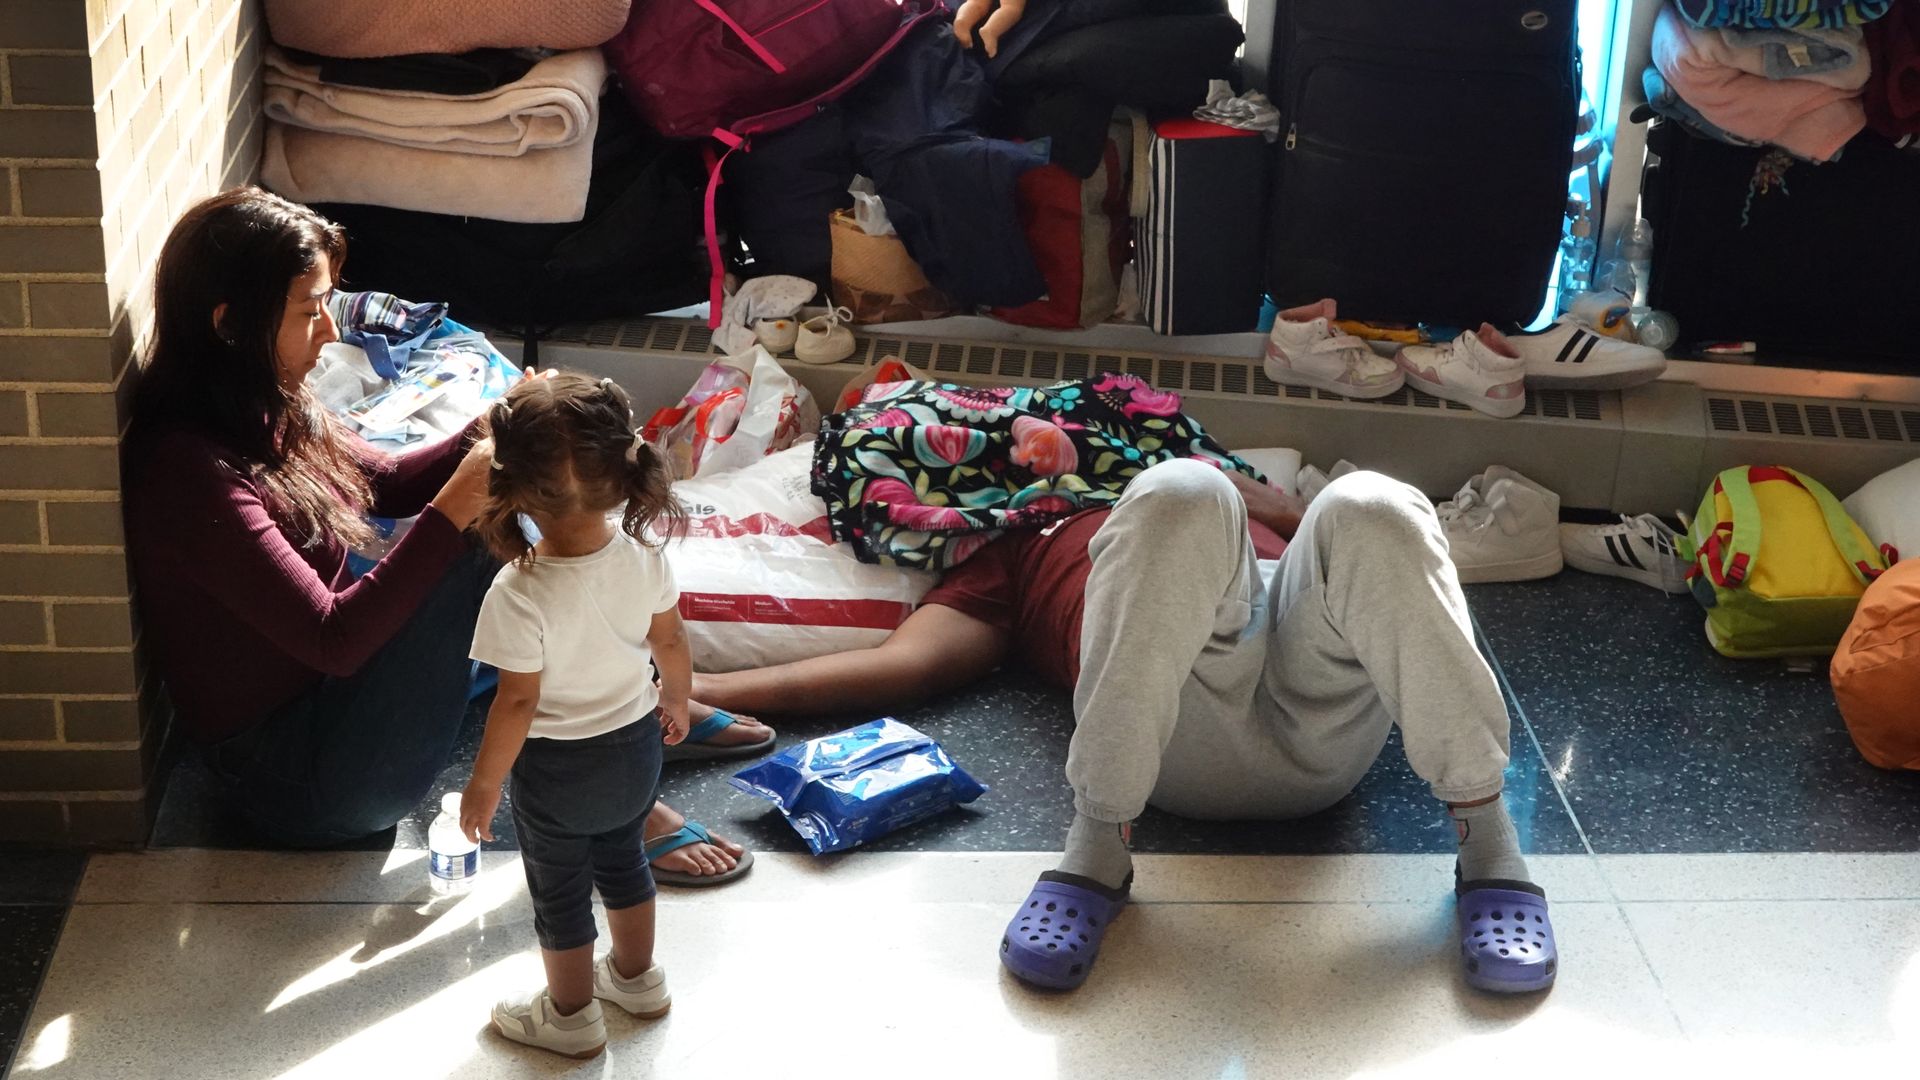 Woman sits on floor, back of a toddler with pigtails, man in sweatpants lies on floor with face covered.